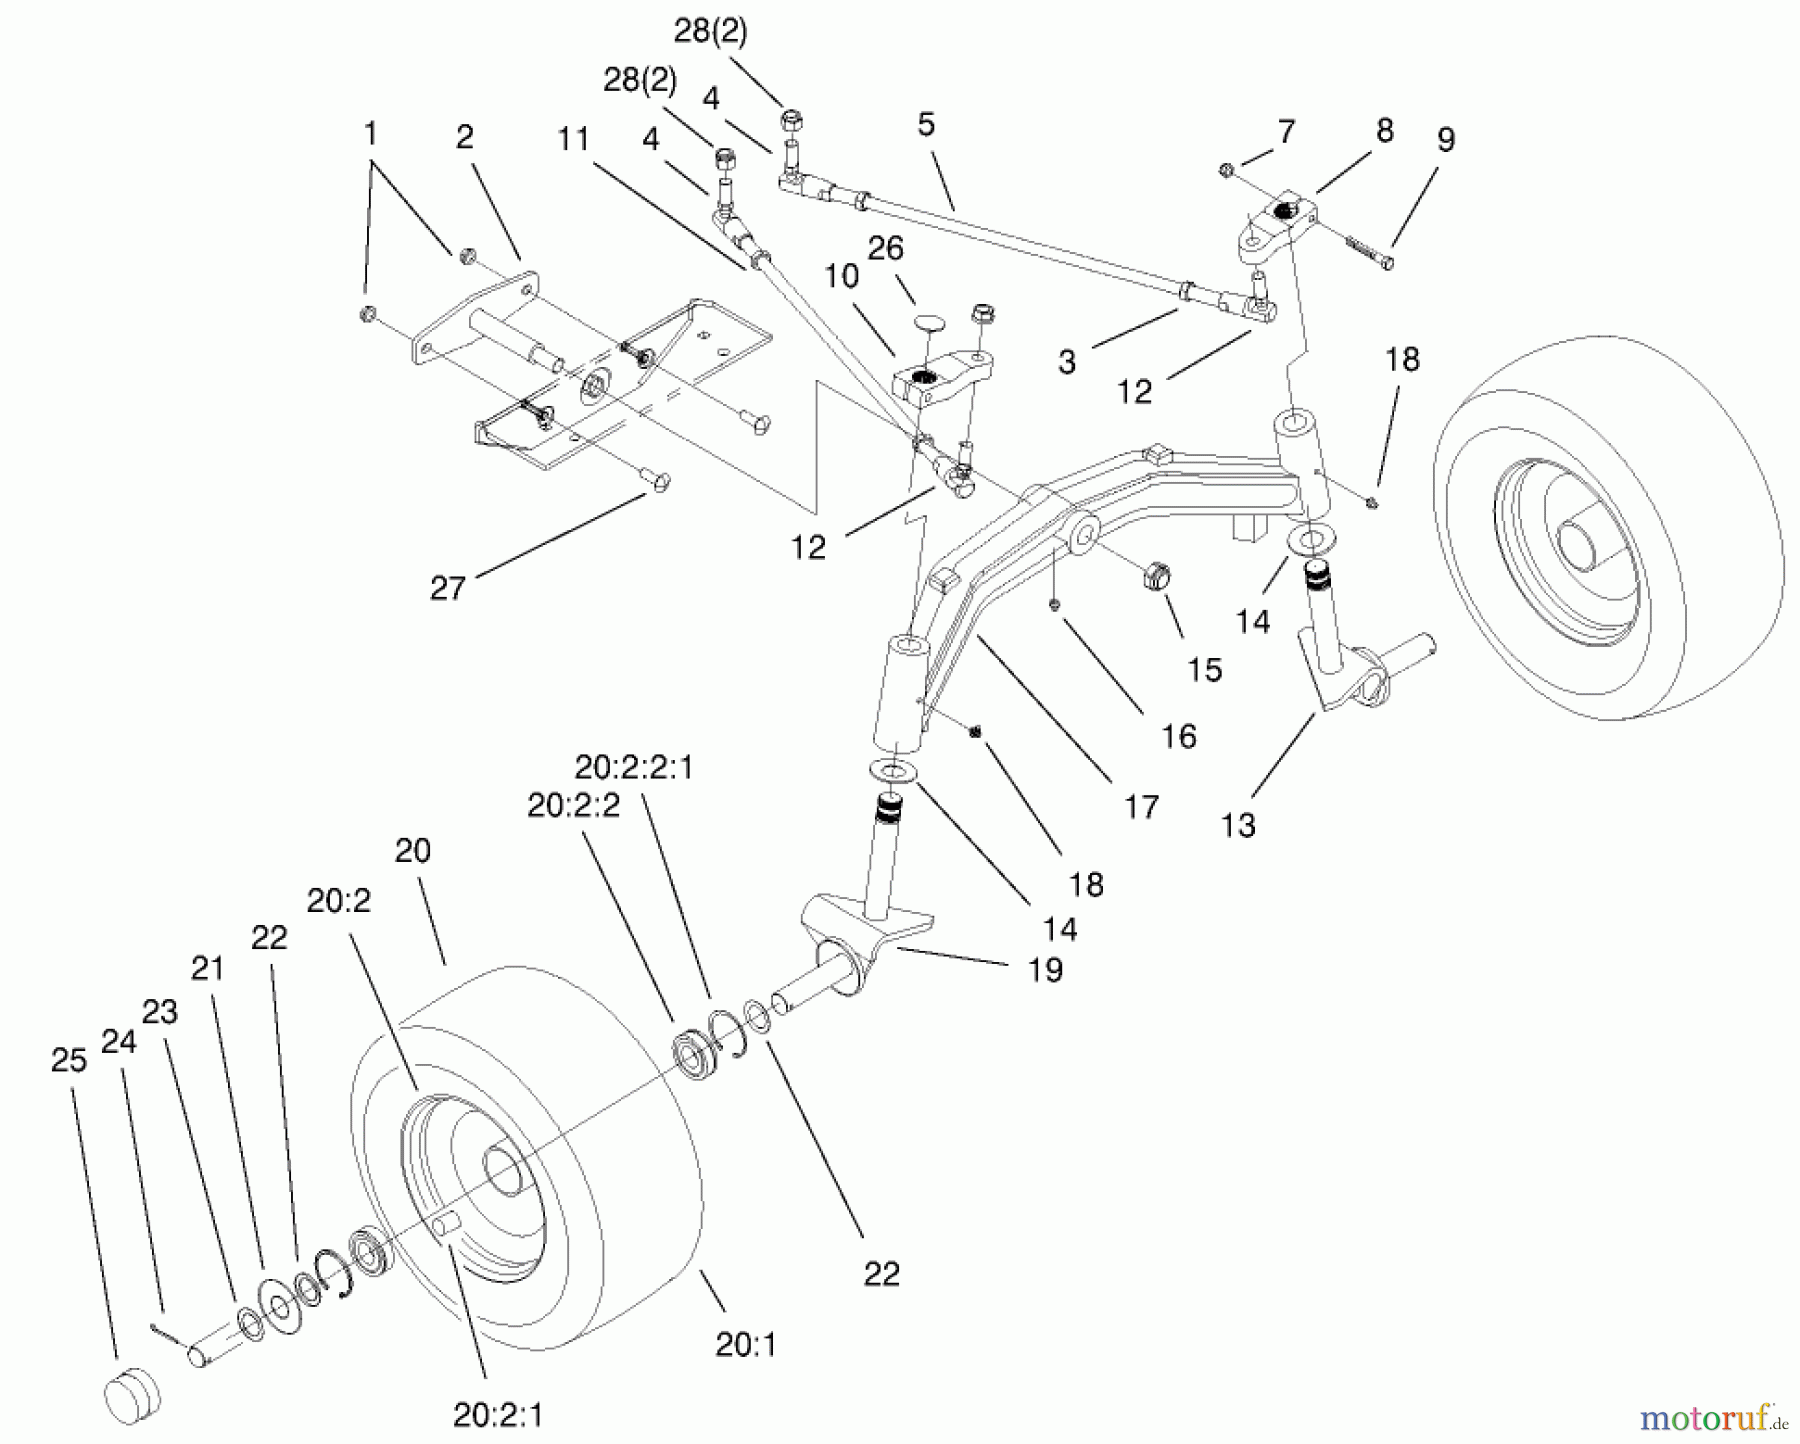  Toro Neu Mowers, Lawn & Garden Tractor Seite 1 73580 (520Lxi) - Toro 520Lxi Garden Tractor, 2000 (200000001-200999999) TIE RODS, SPINDLE, & FRONT AXLE ASSEMBLY